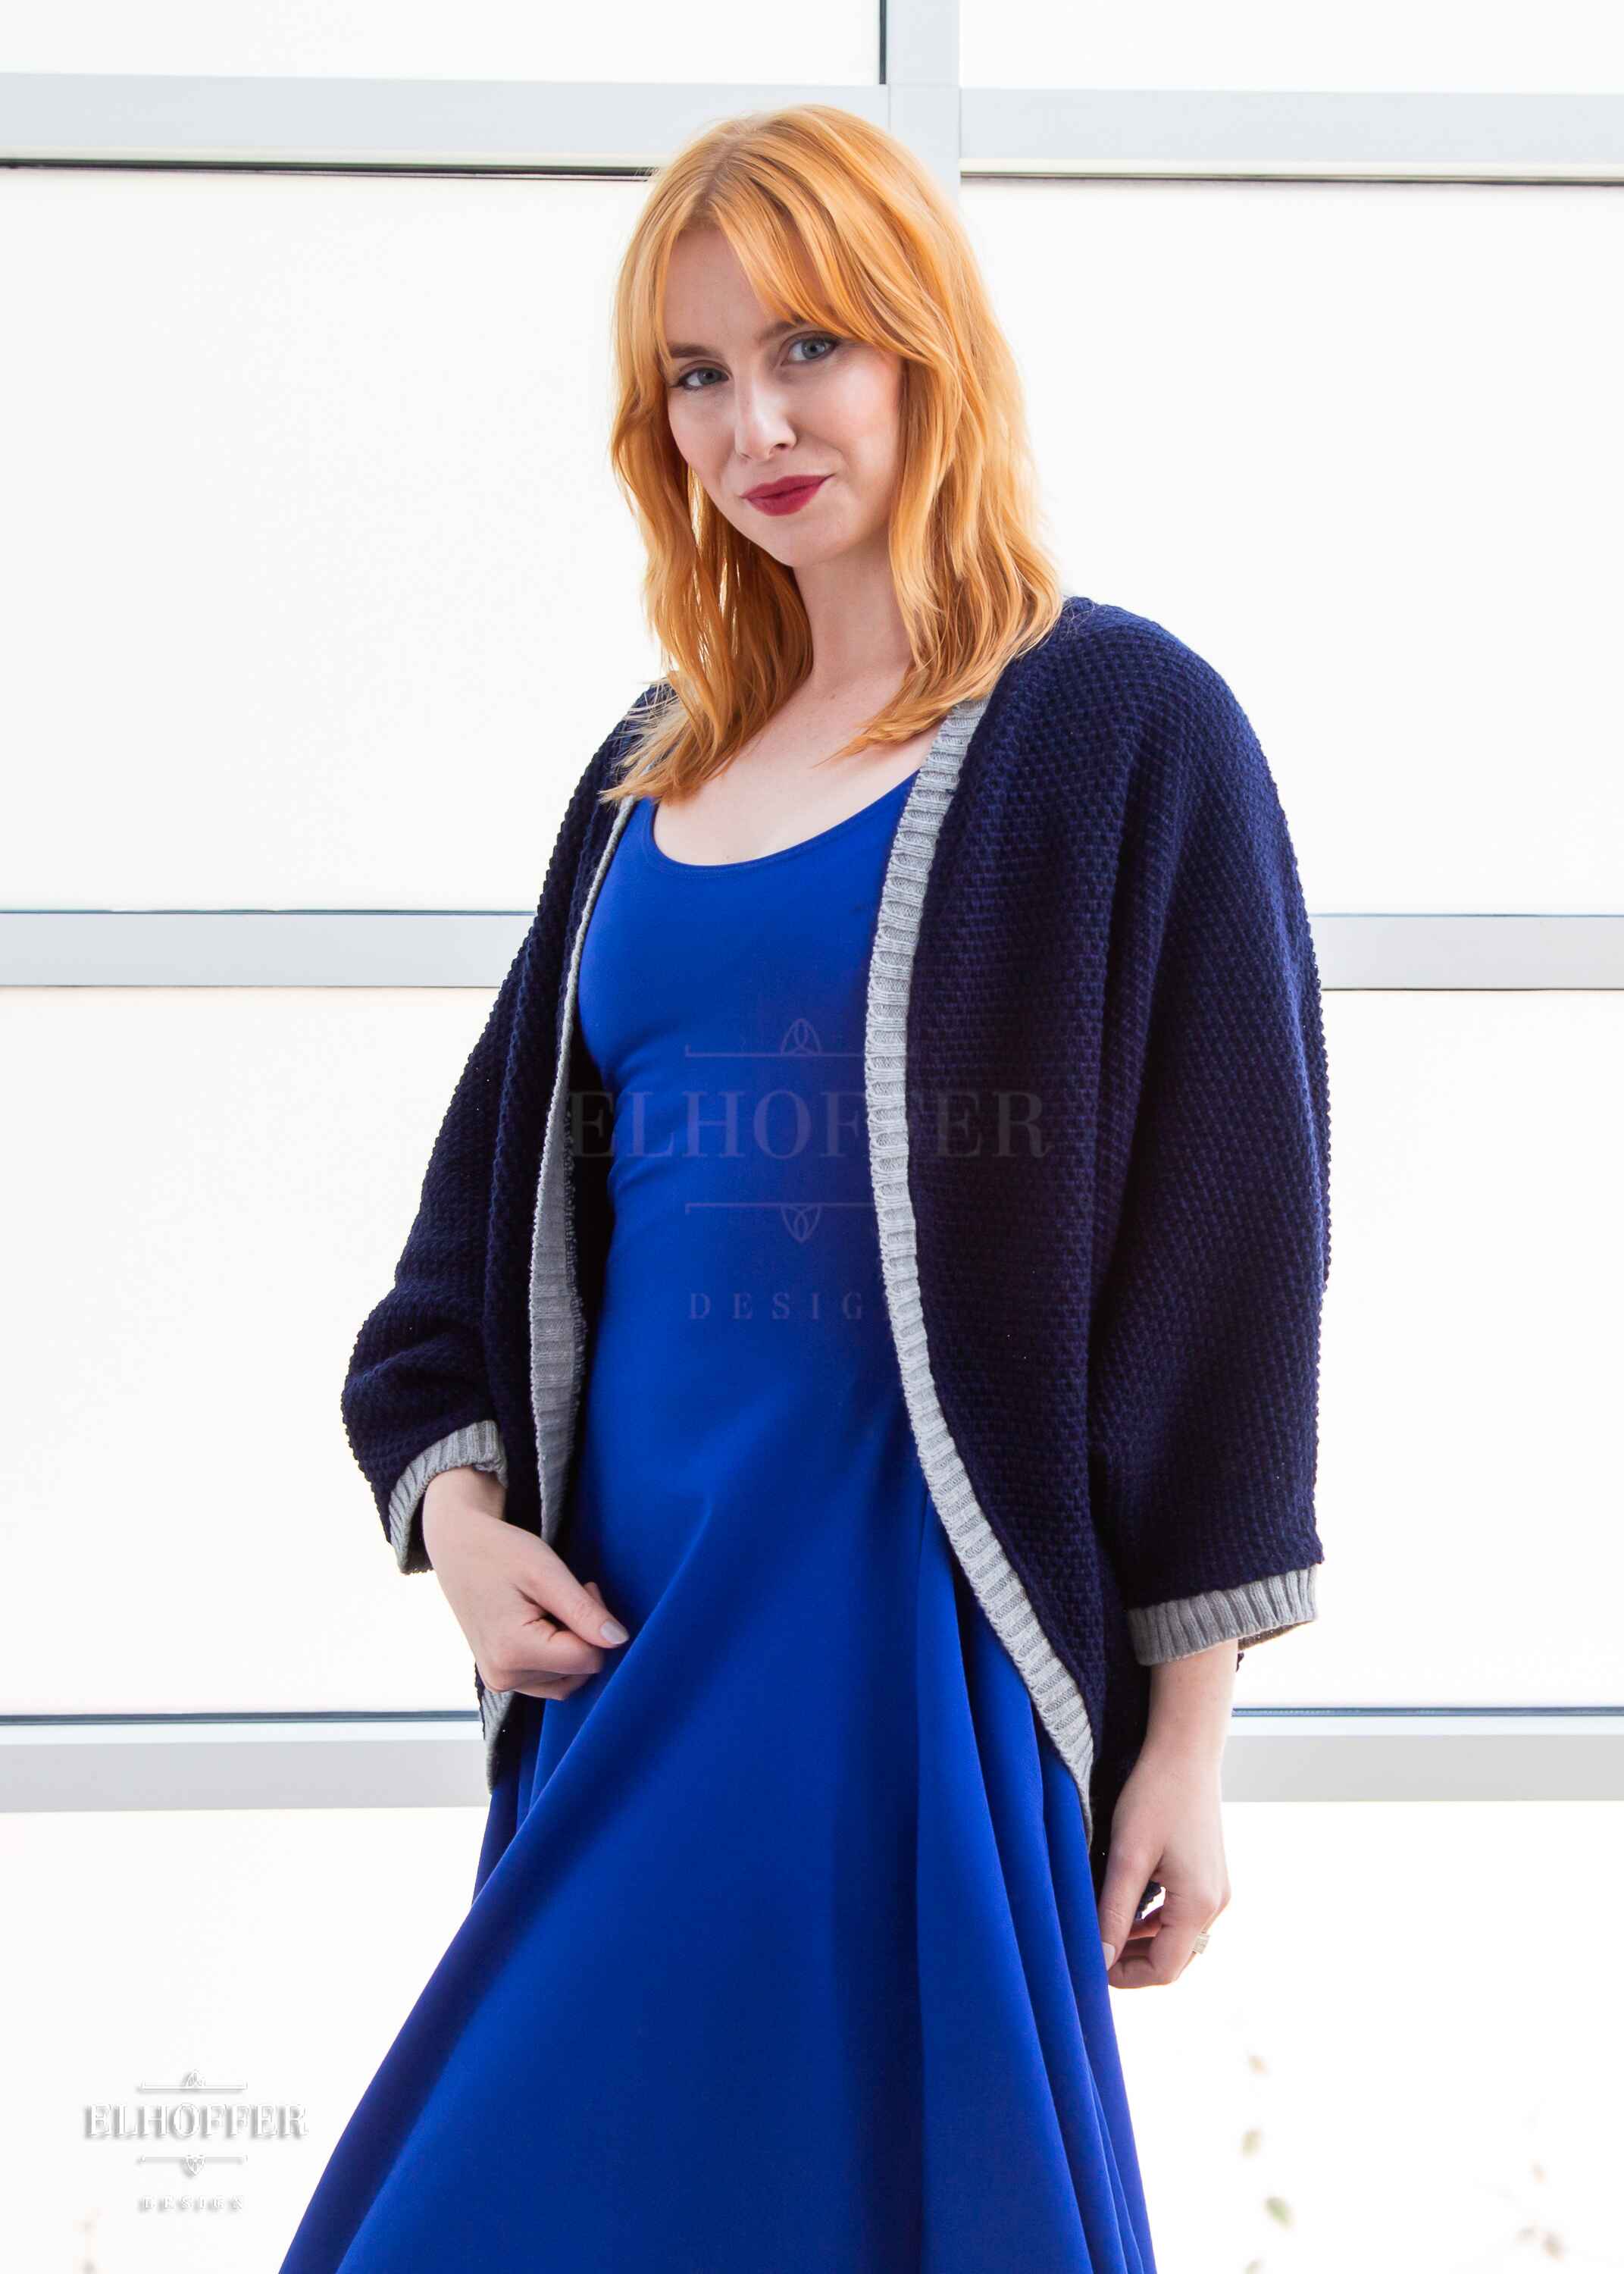 Harley, a fair skinned S model with shoulder length strawberry blonde hair, is wearing a dark blue loose knit dolman with light grey ribbing around edges and cuffs. The dolman features 3/4 length sleeves and a magical script design (circle with T crossing through the circle) on the back. She paired the dolman with a cobalt blue knee length dress.